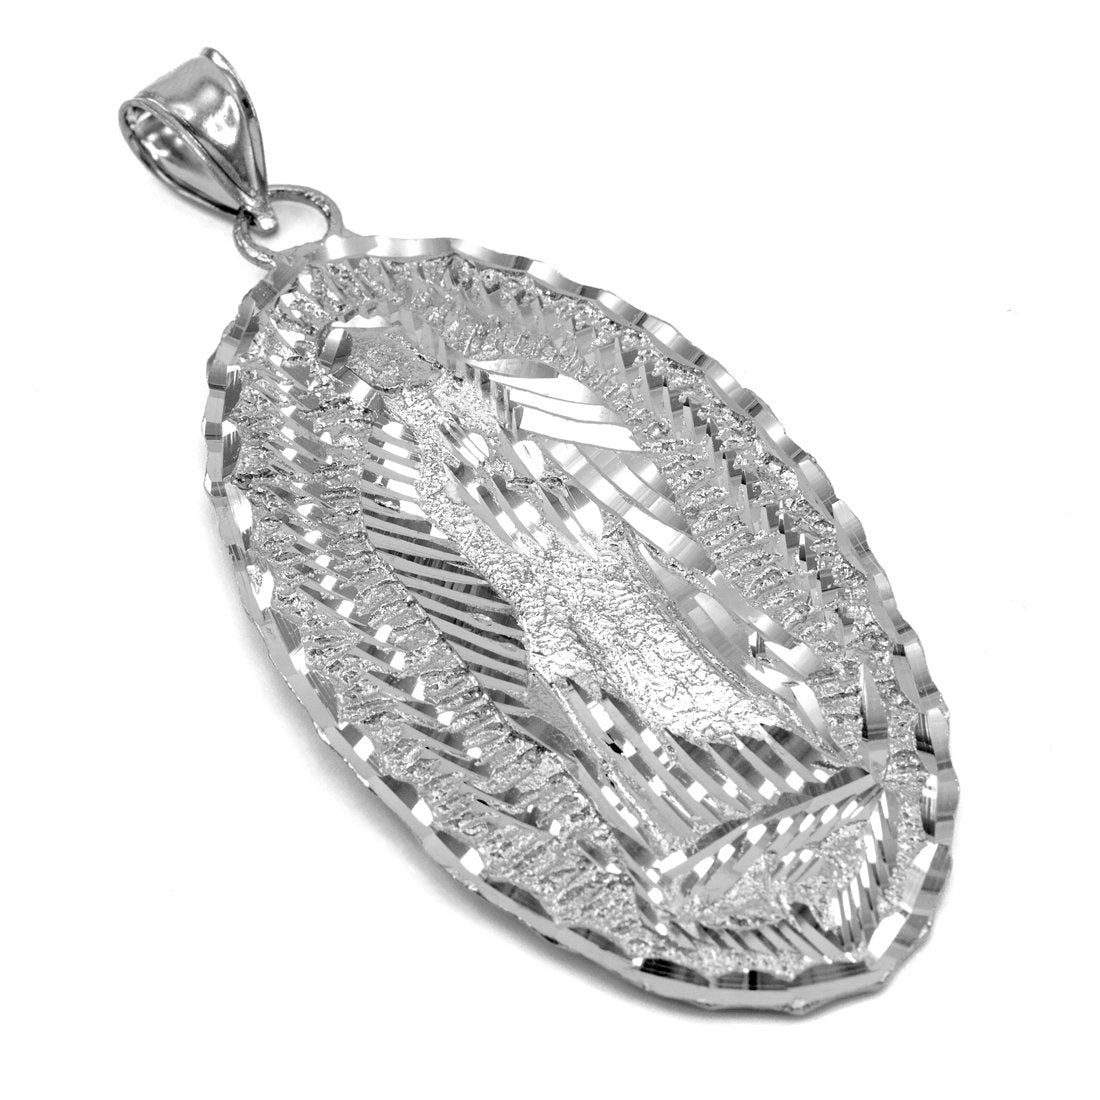 Sterling Silver Our Lady of Guadalupe Mens Large DC Pendant Karma Blingz